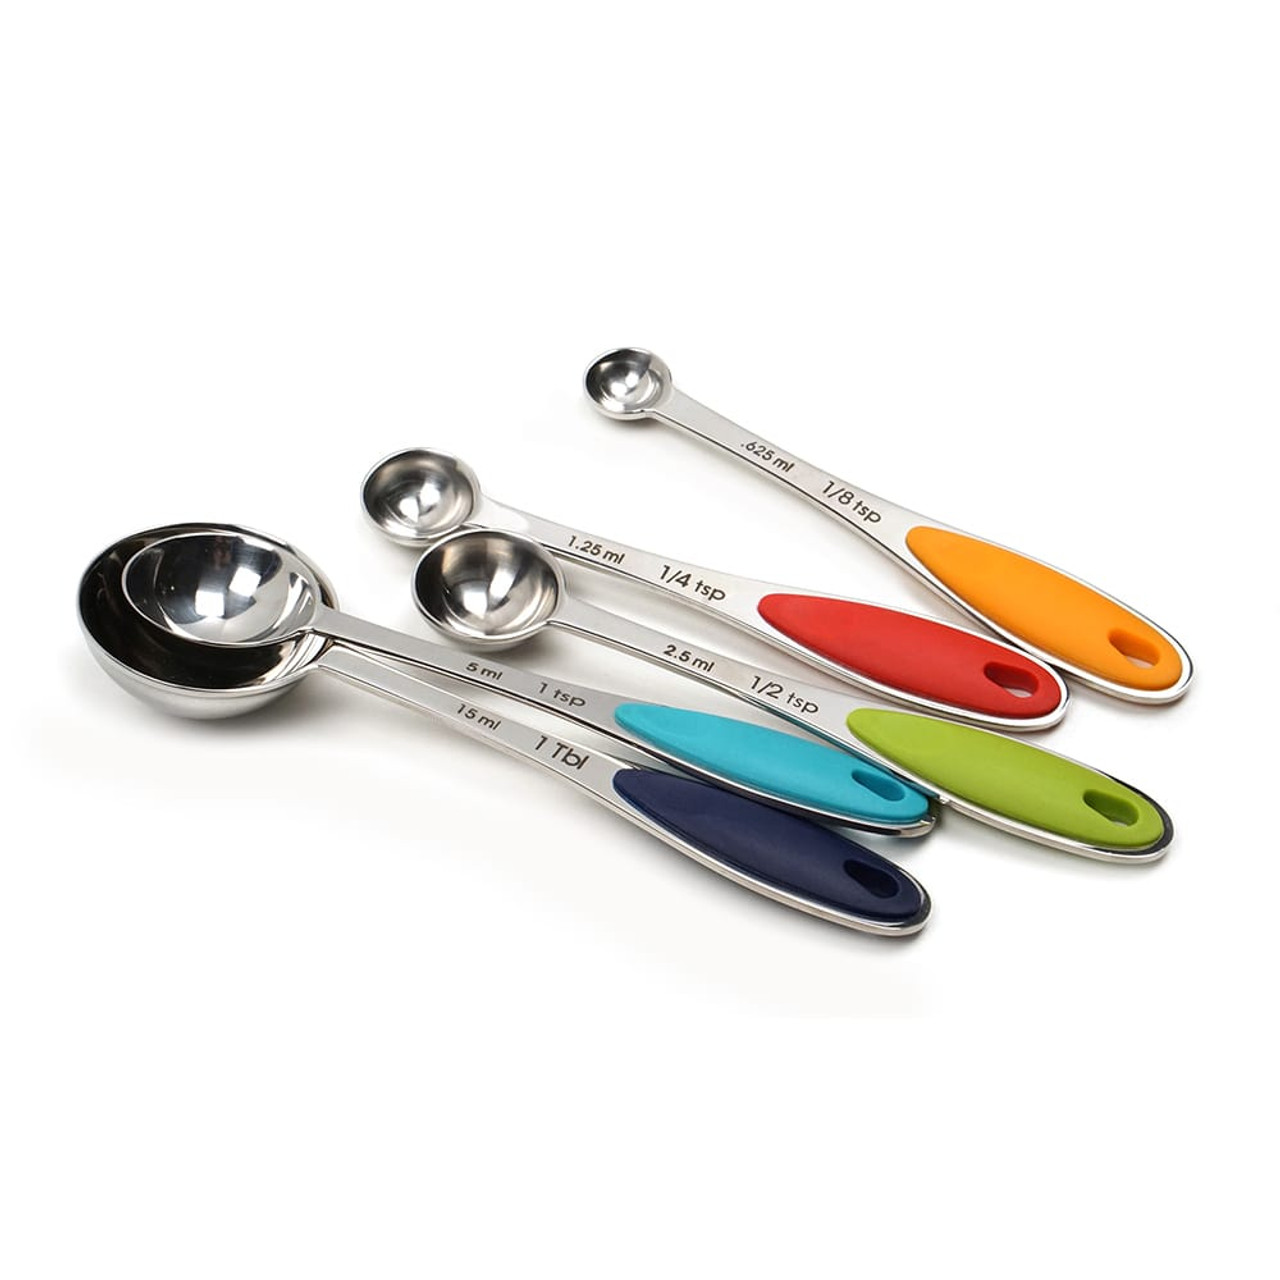 https://cdn11.bigcommerce.com/s-hccytny0od/images/stencil/1280x1280/products/3730/13425/rsvp-endurance-colorful-measuring-spoon-set-2__25214.1604213097.jpg?c=2?imbypass=on